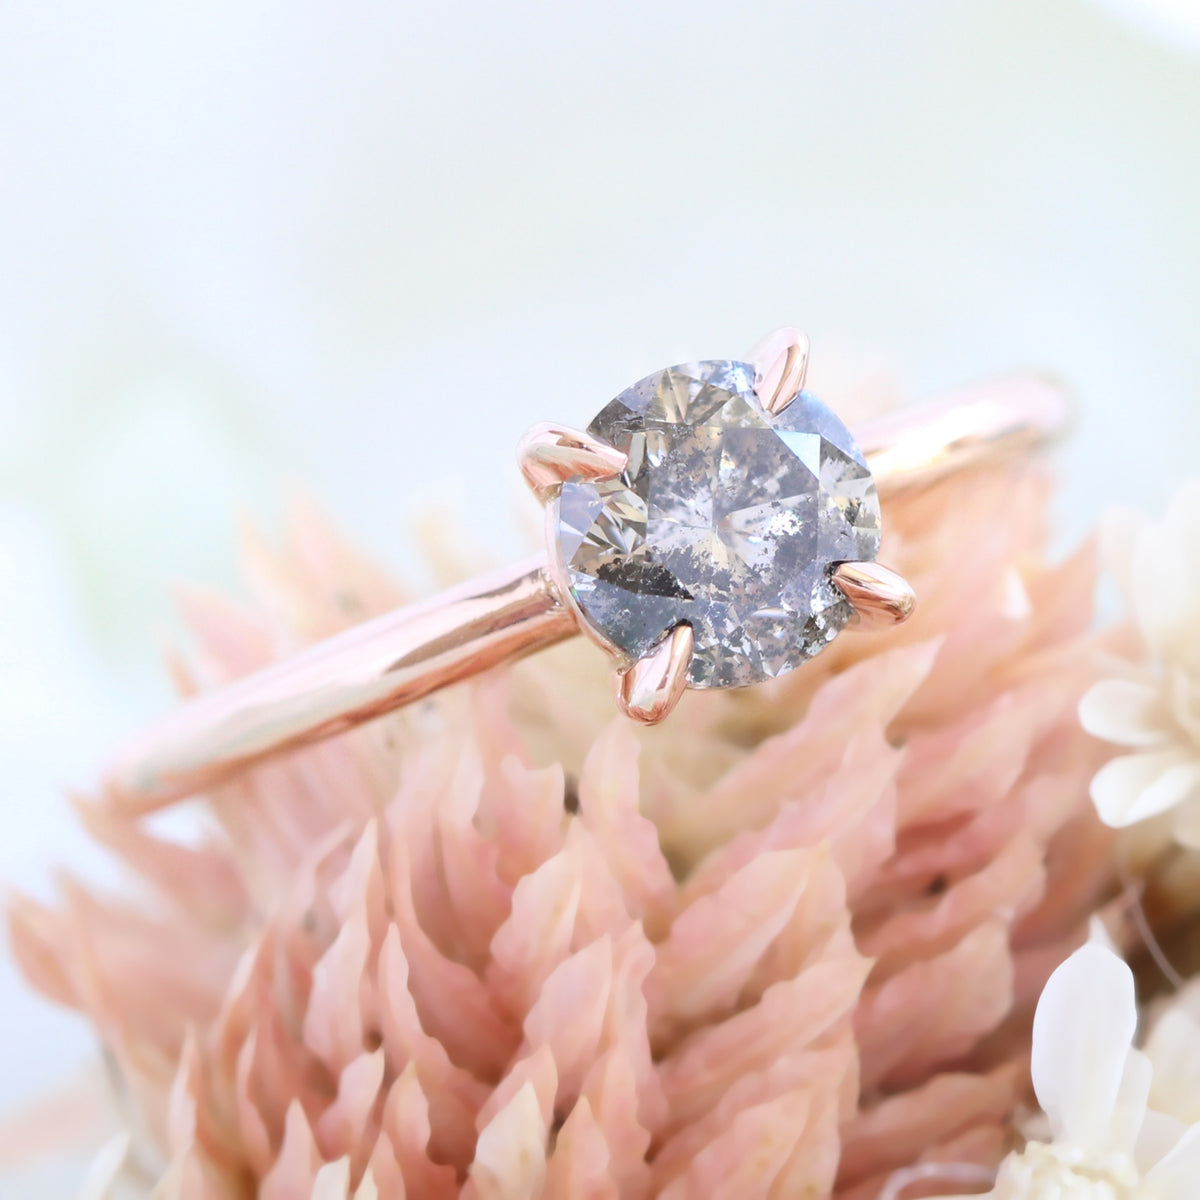 Salt and Pepper Diamond Engagement Ring Rose Gold Solitaire Grey Diamond Ring La More Design Jewelry